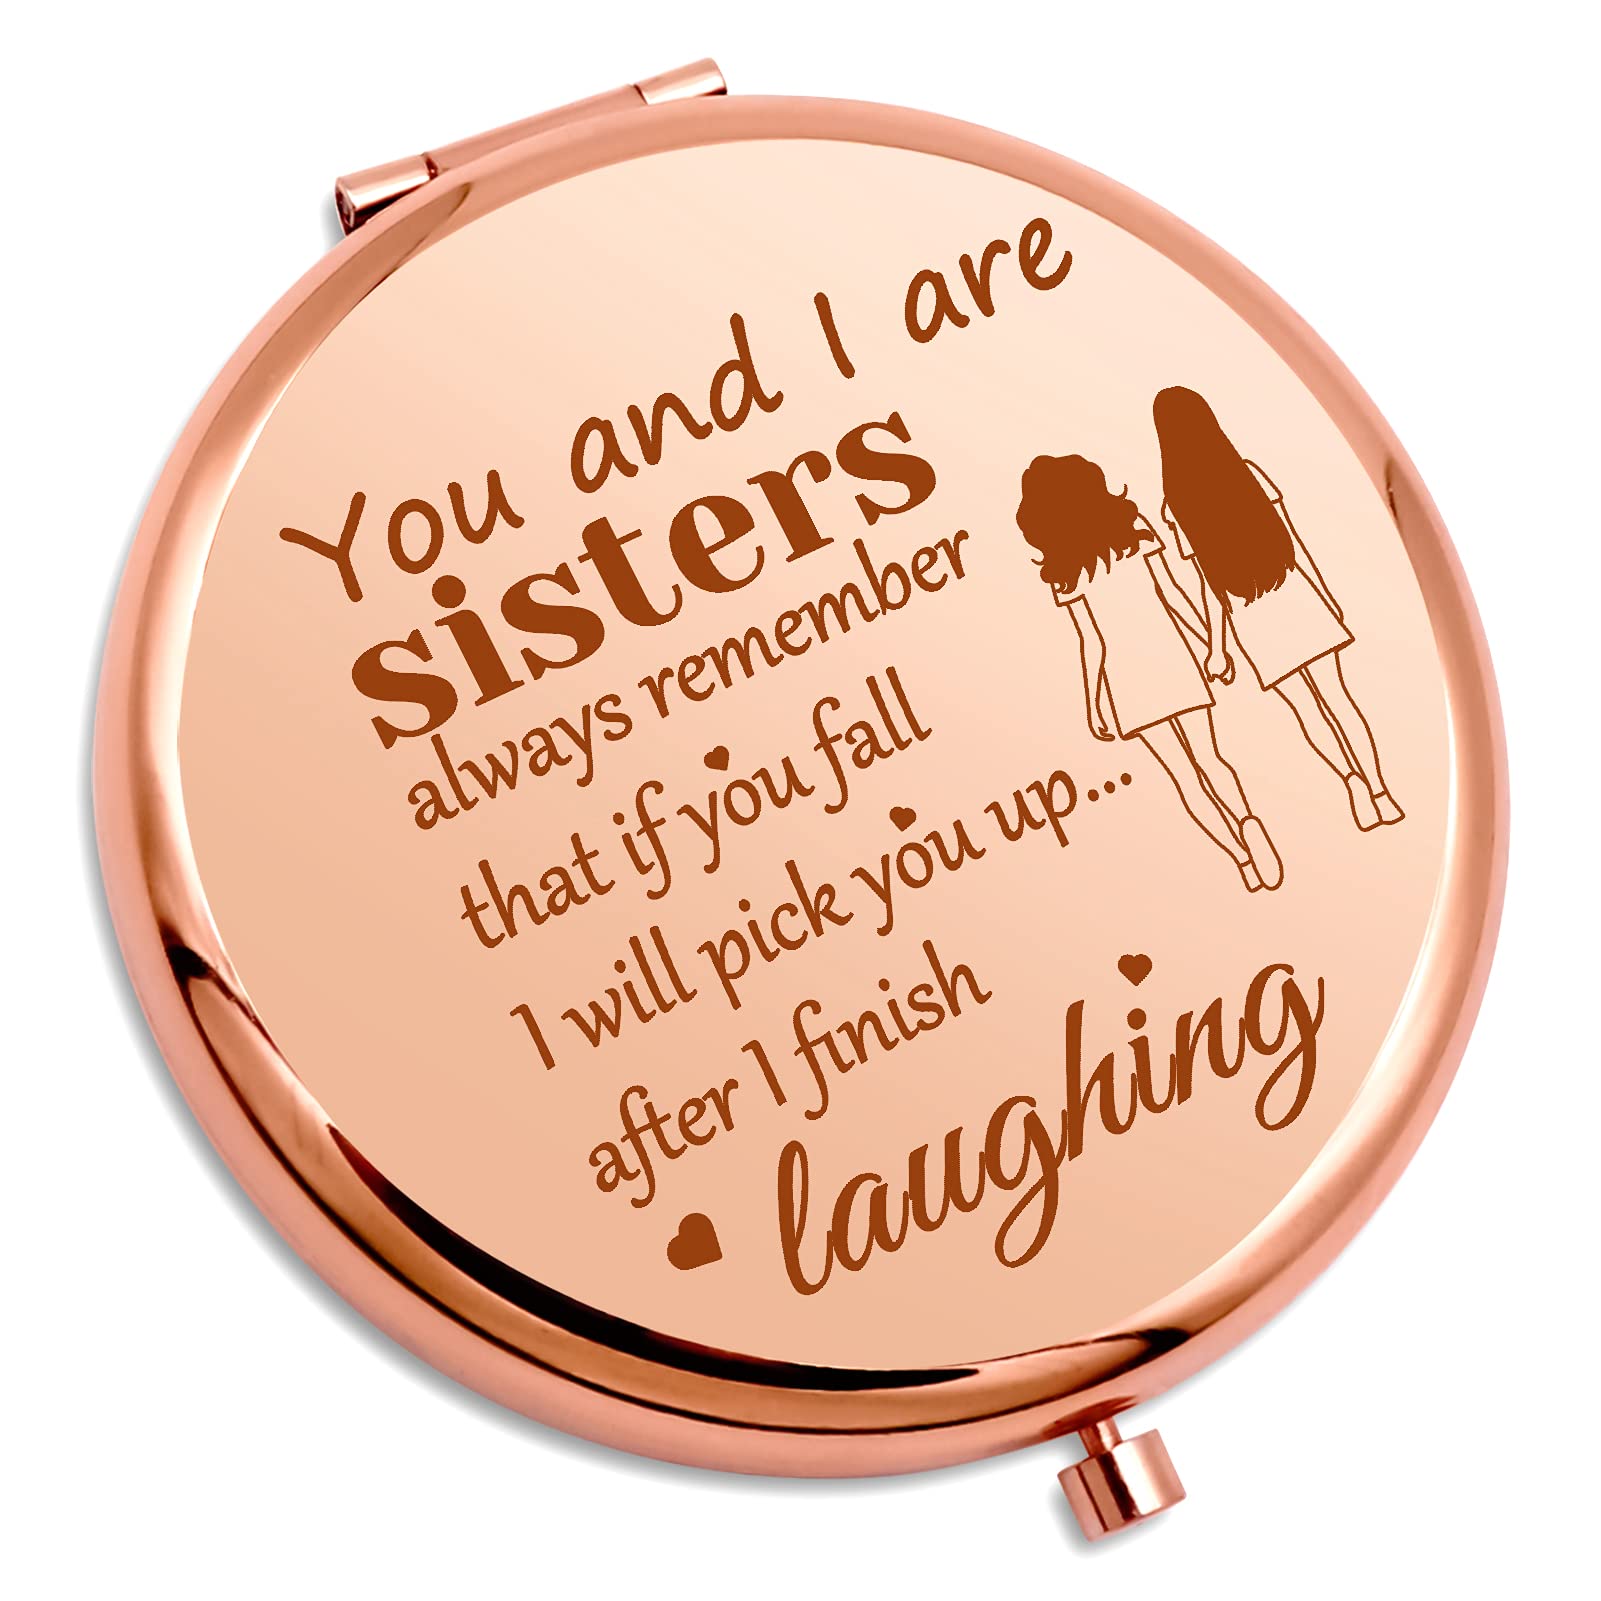 Little Sister Gifts From Big Sister, Gift for Sister on Her